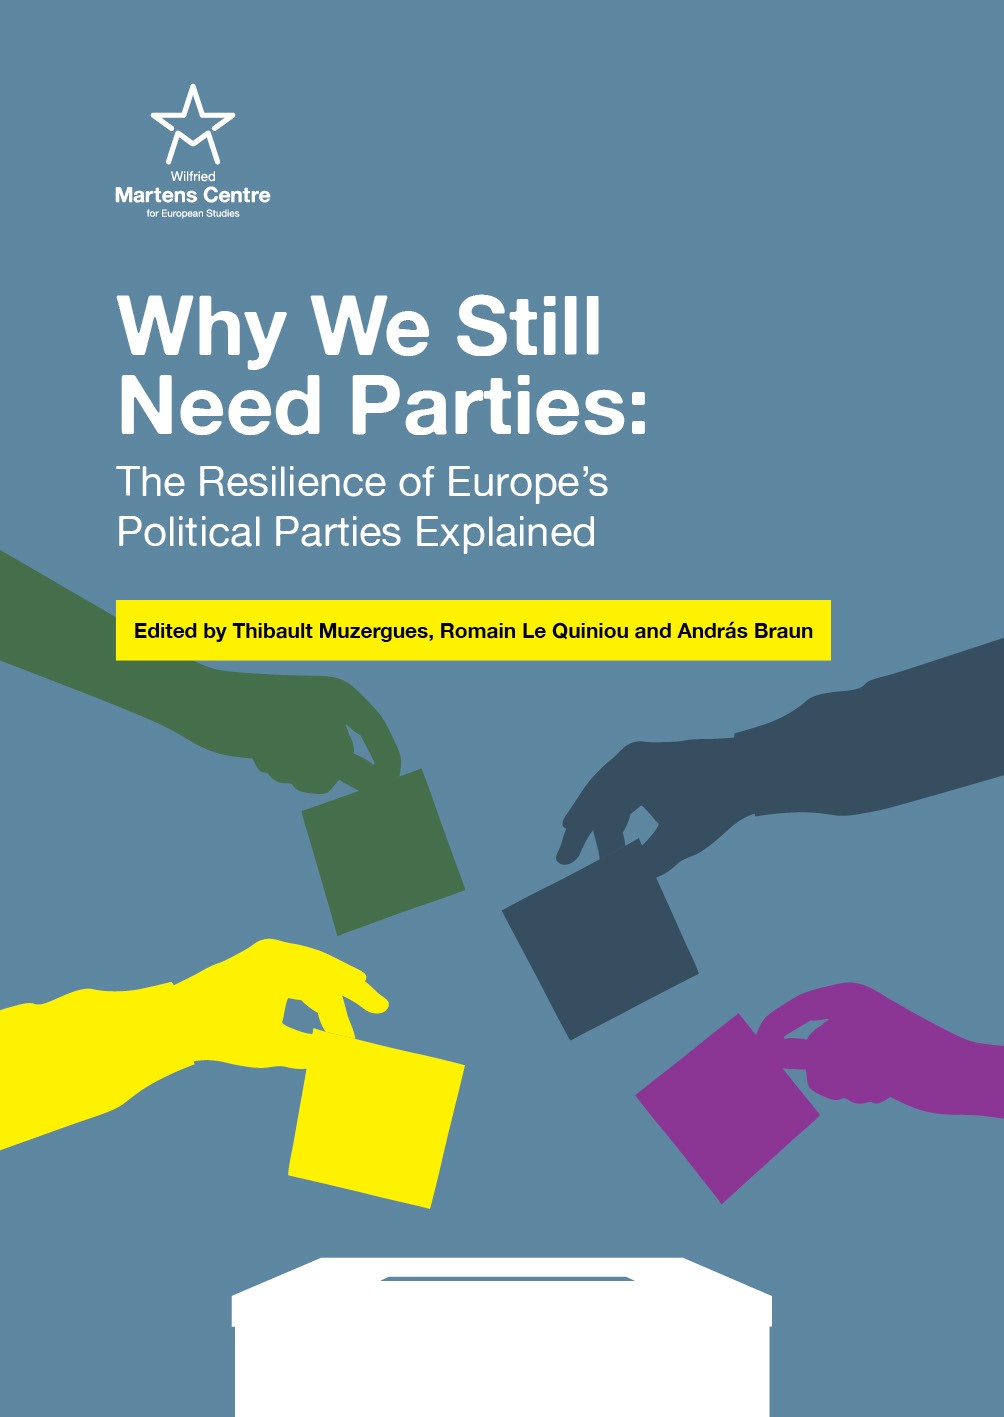 Why We Still Need Parties: The Resilience of Europe’s Political Parties Explained